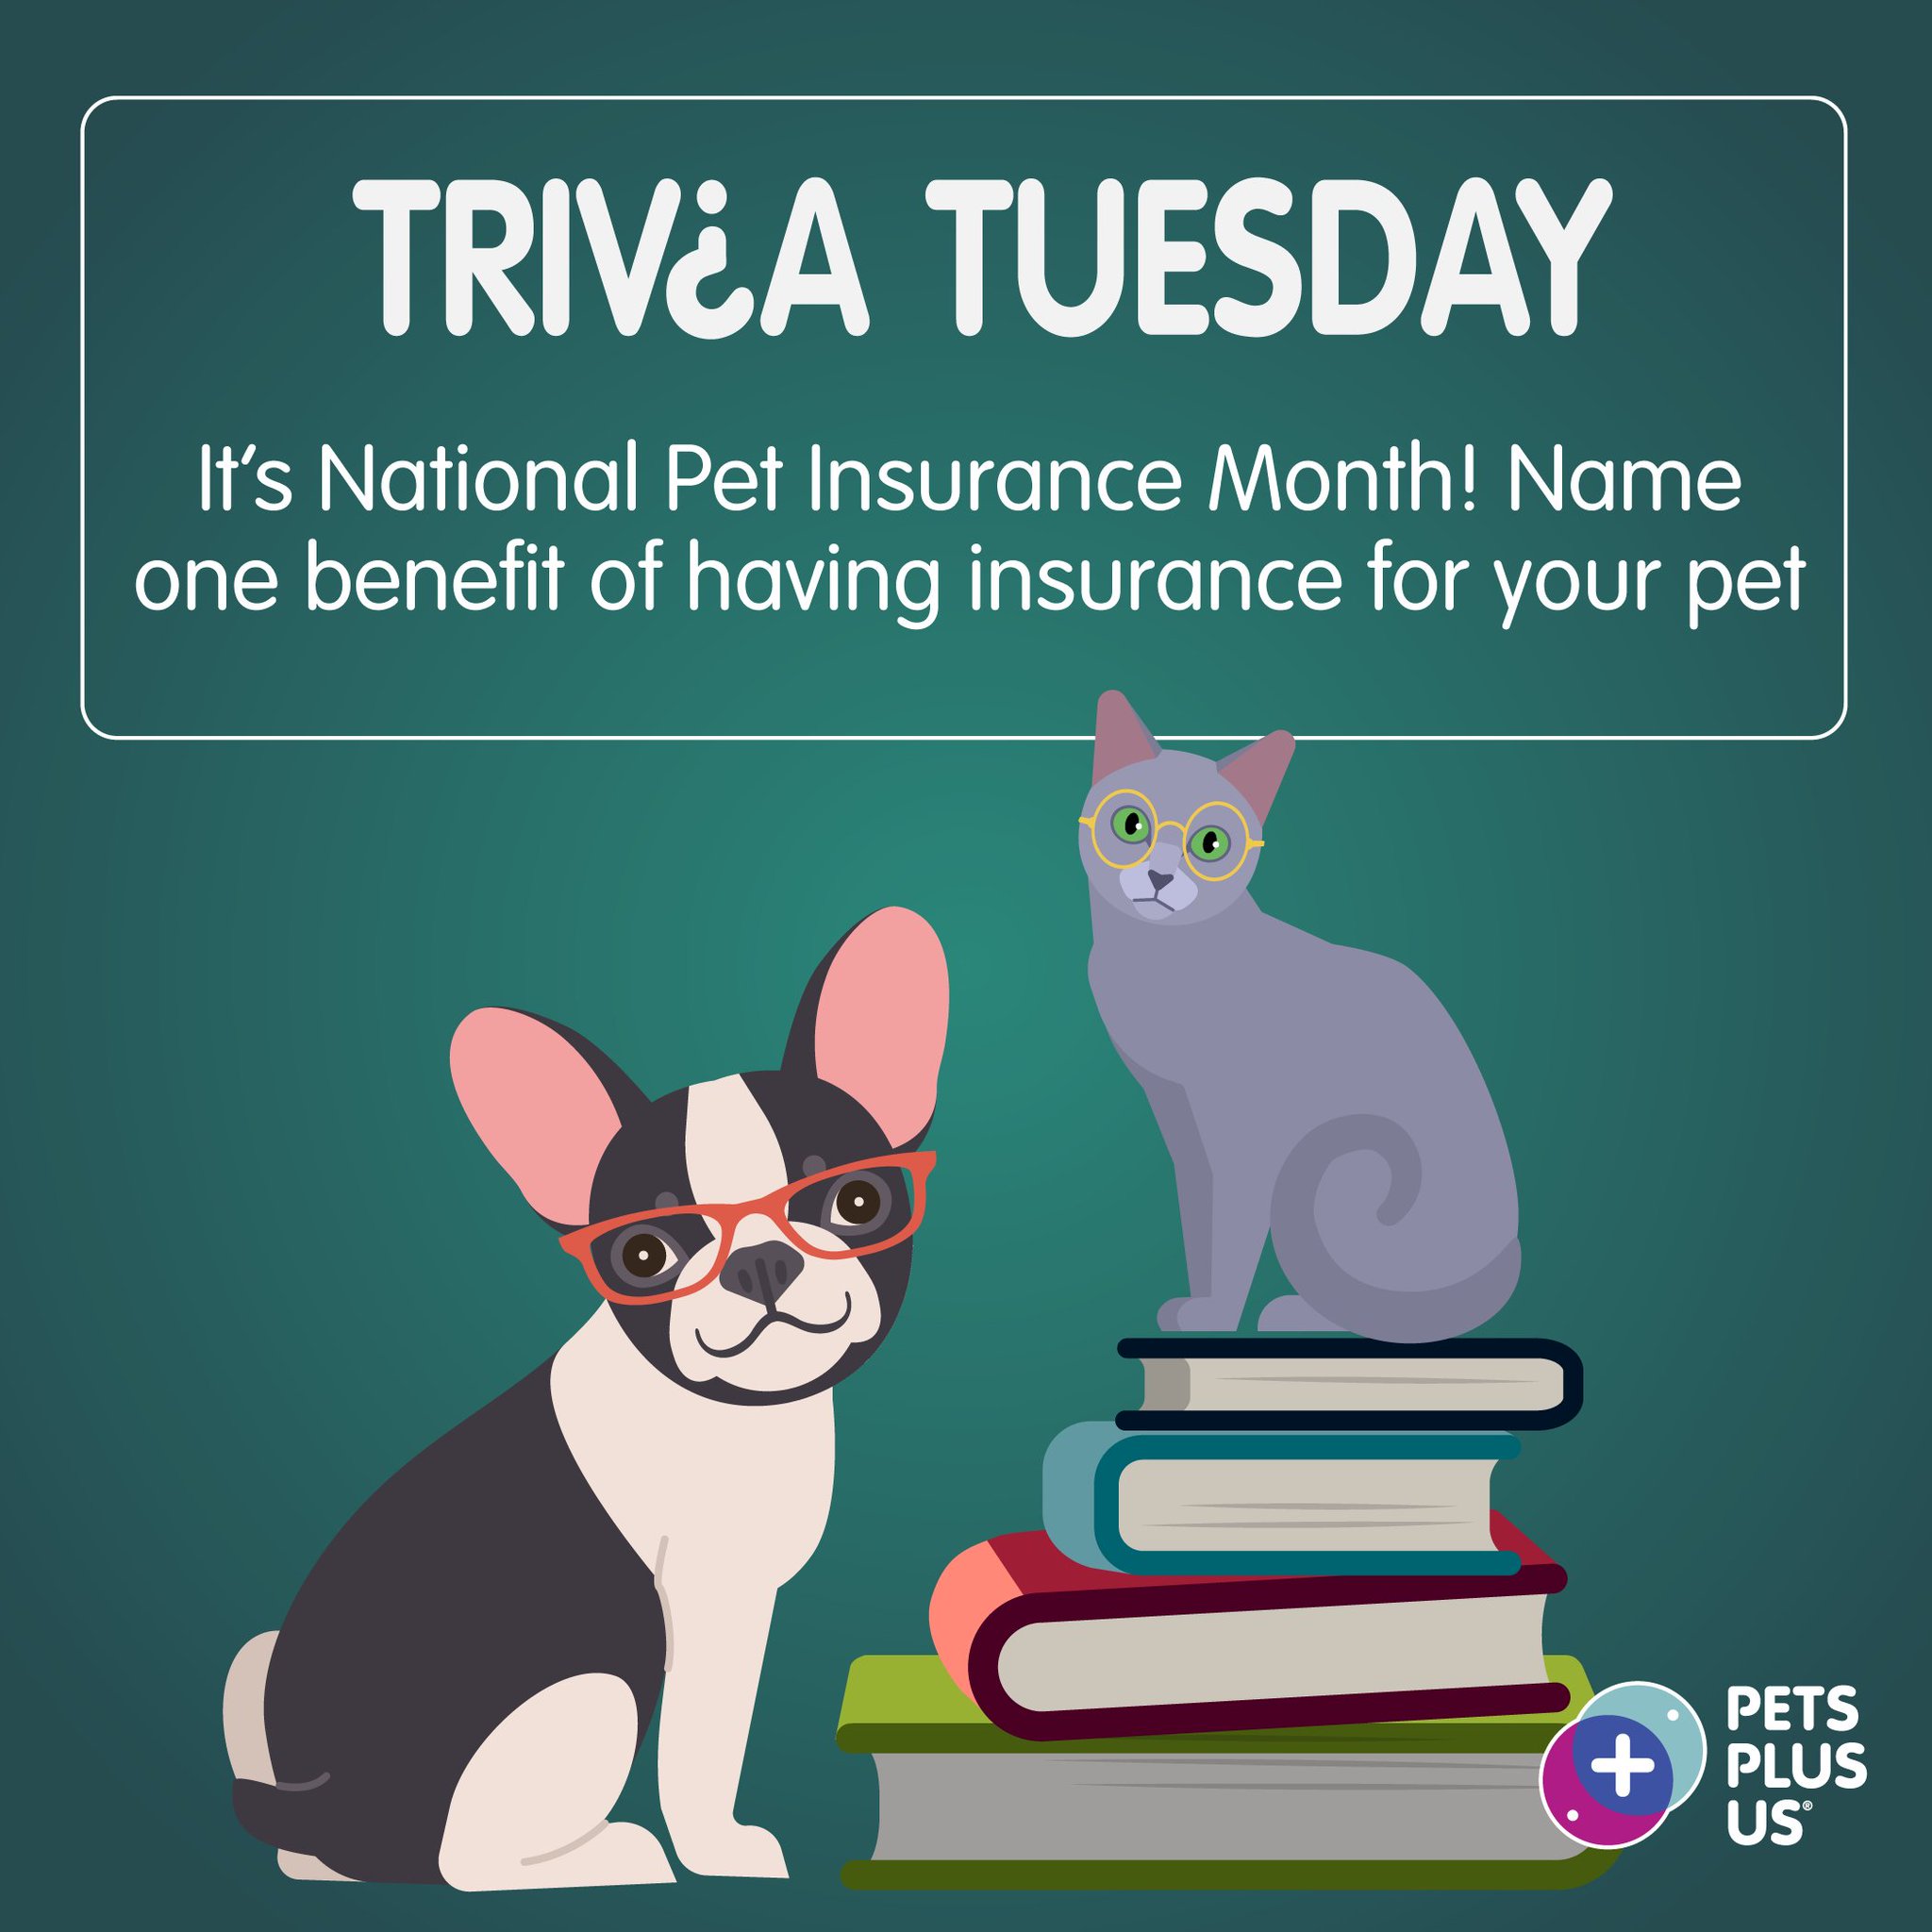 Pets Plus Us On Twitter Win A 25 Petsmart Gc Answer The Question Rt To Enter Our Triviatuesday Giveaway Open To Cnd Residents Only Contest Ends At 11 59pm Est Note This